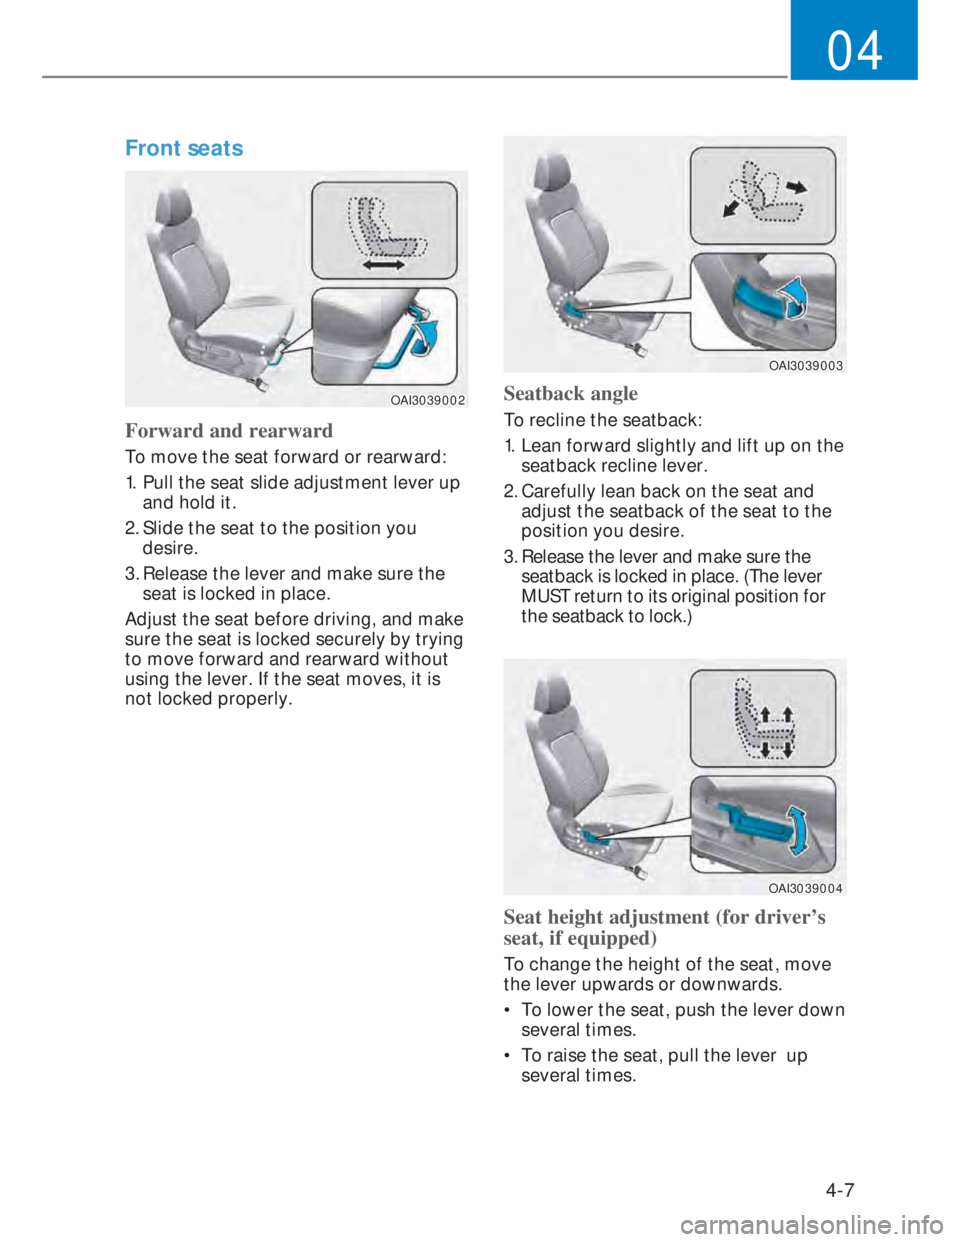 HYUNDAI I20 2021  Owners Manual 4-7
04
Front seats  
OAI3039002OAI3039002
Forward and rearward
To move the seat forward or rearward:
1.  Pull the seat slide adjustment lever up 
and hold it.
2. Slide the seat to the position you 
de